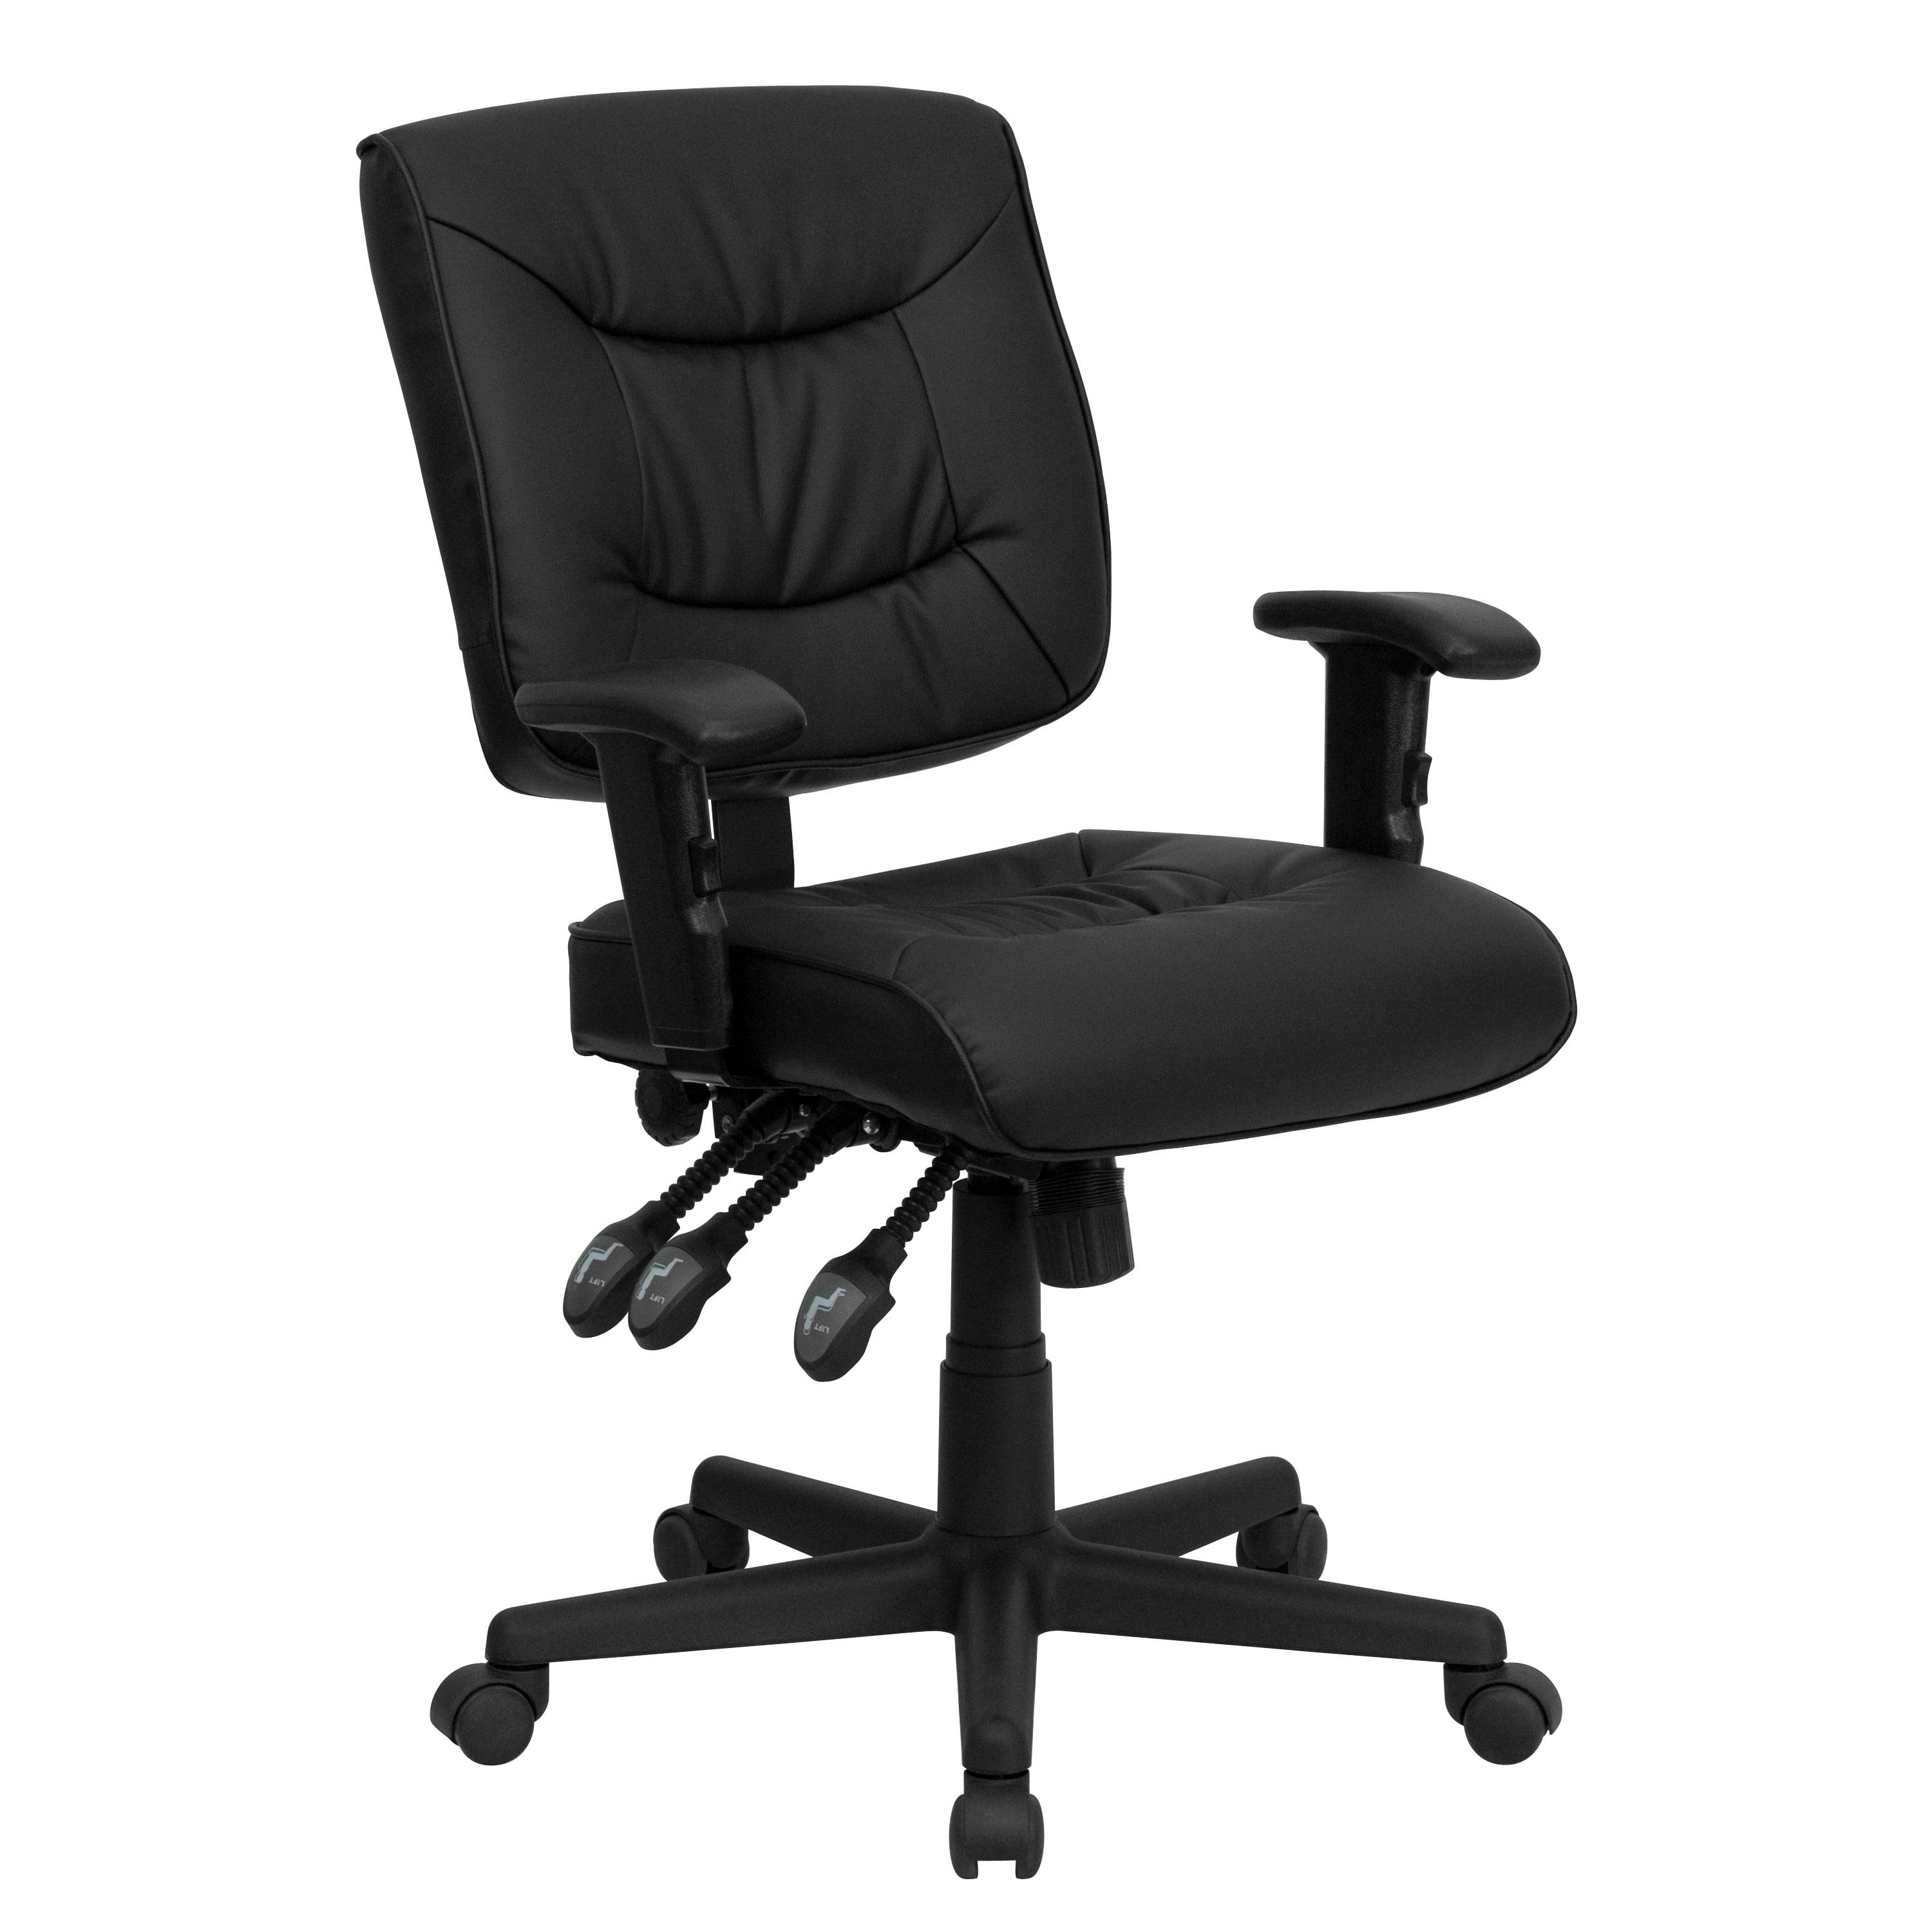 Ergonomic Mid-Back Black LeatherSoft Swivel Task Chair with Adjustable Arms